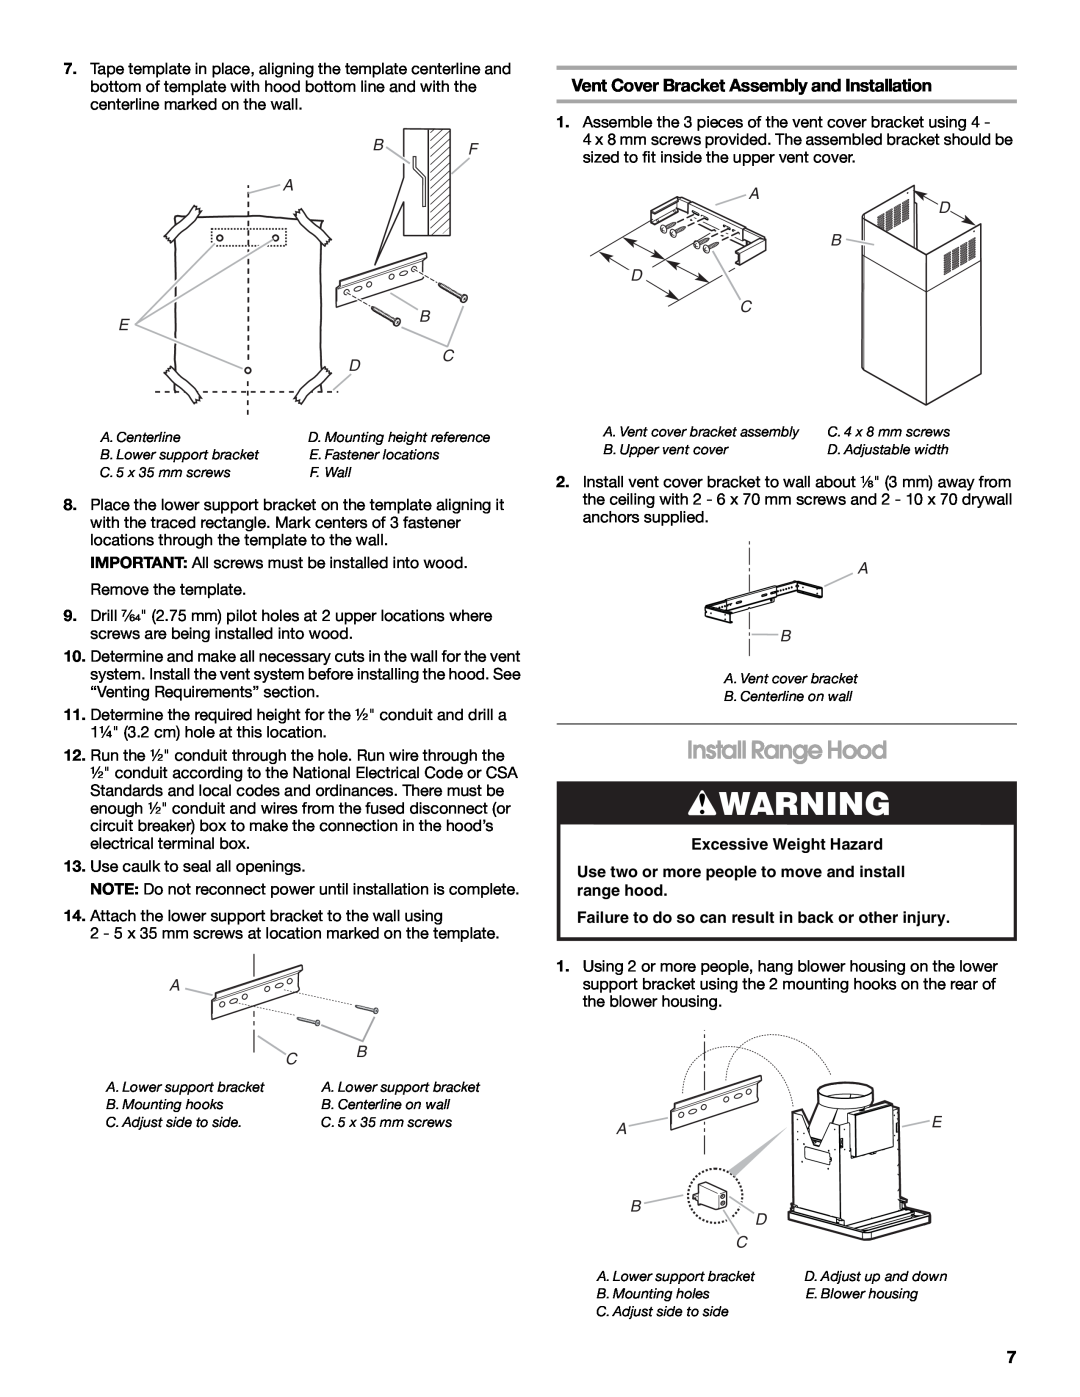 Whirlpool W10018010 installation instructions Install Range Hood, Vent Cover Bracket Assembly and Installation, A D B D C 